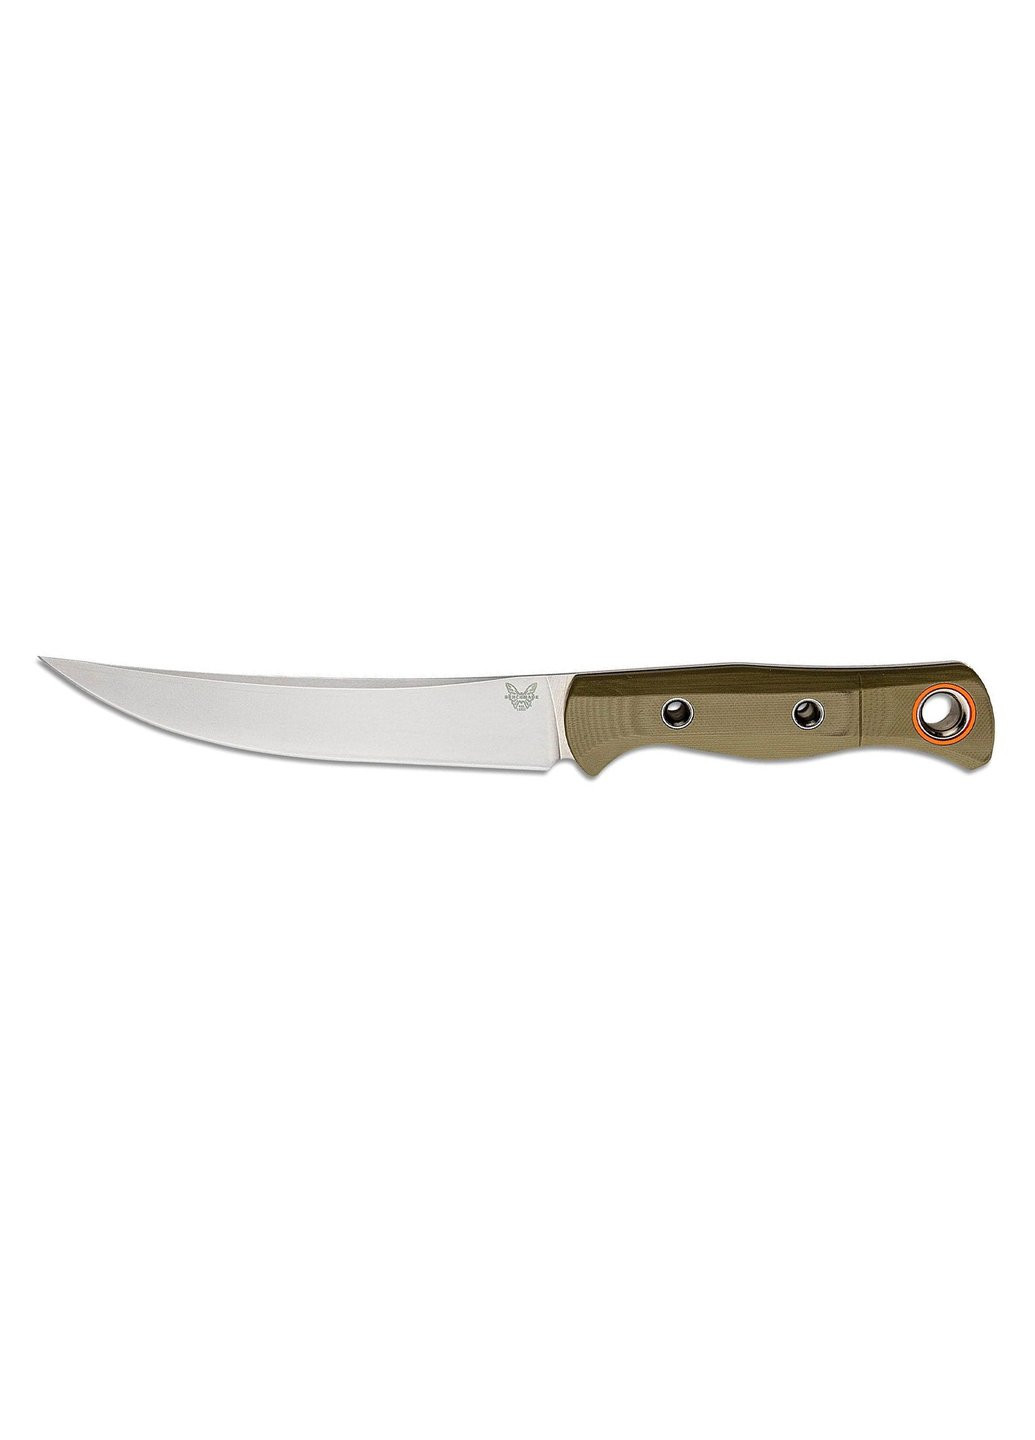 Ніж Meatcrafter Olive G10 (15500-3) Benchmade (257223663)